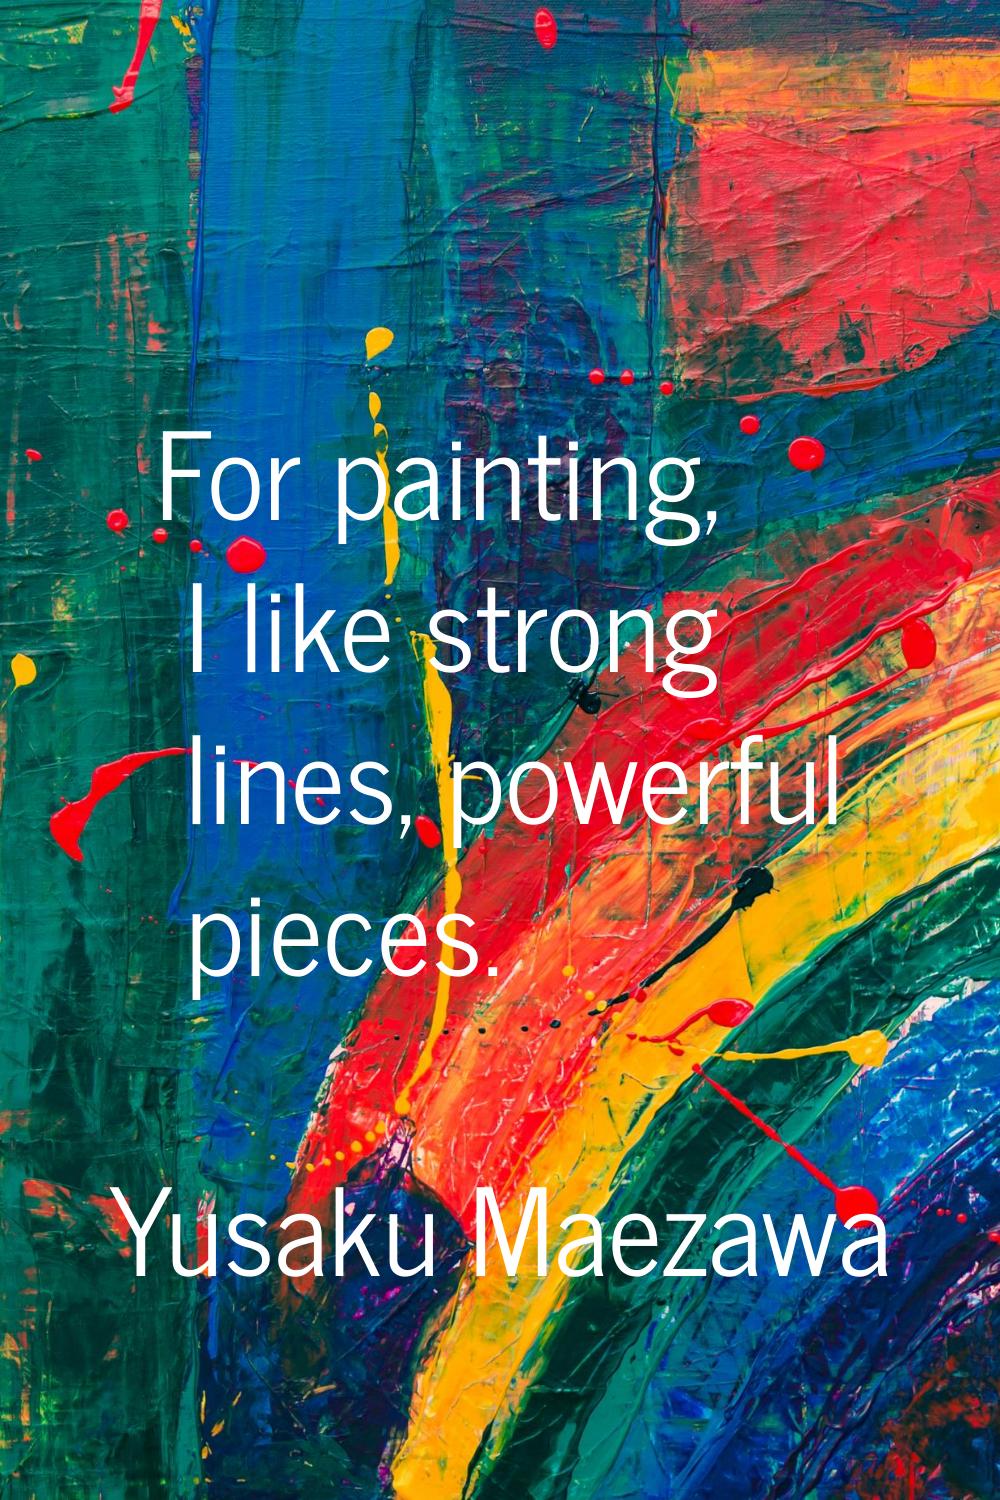 For painting, I like strong lines, powerful pieces.